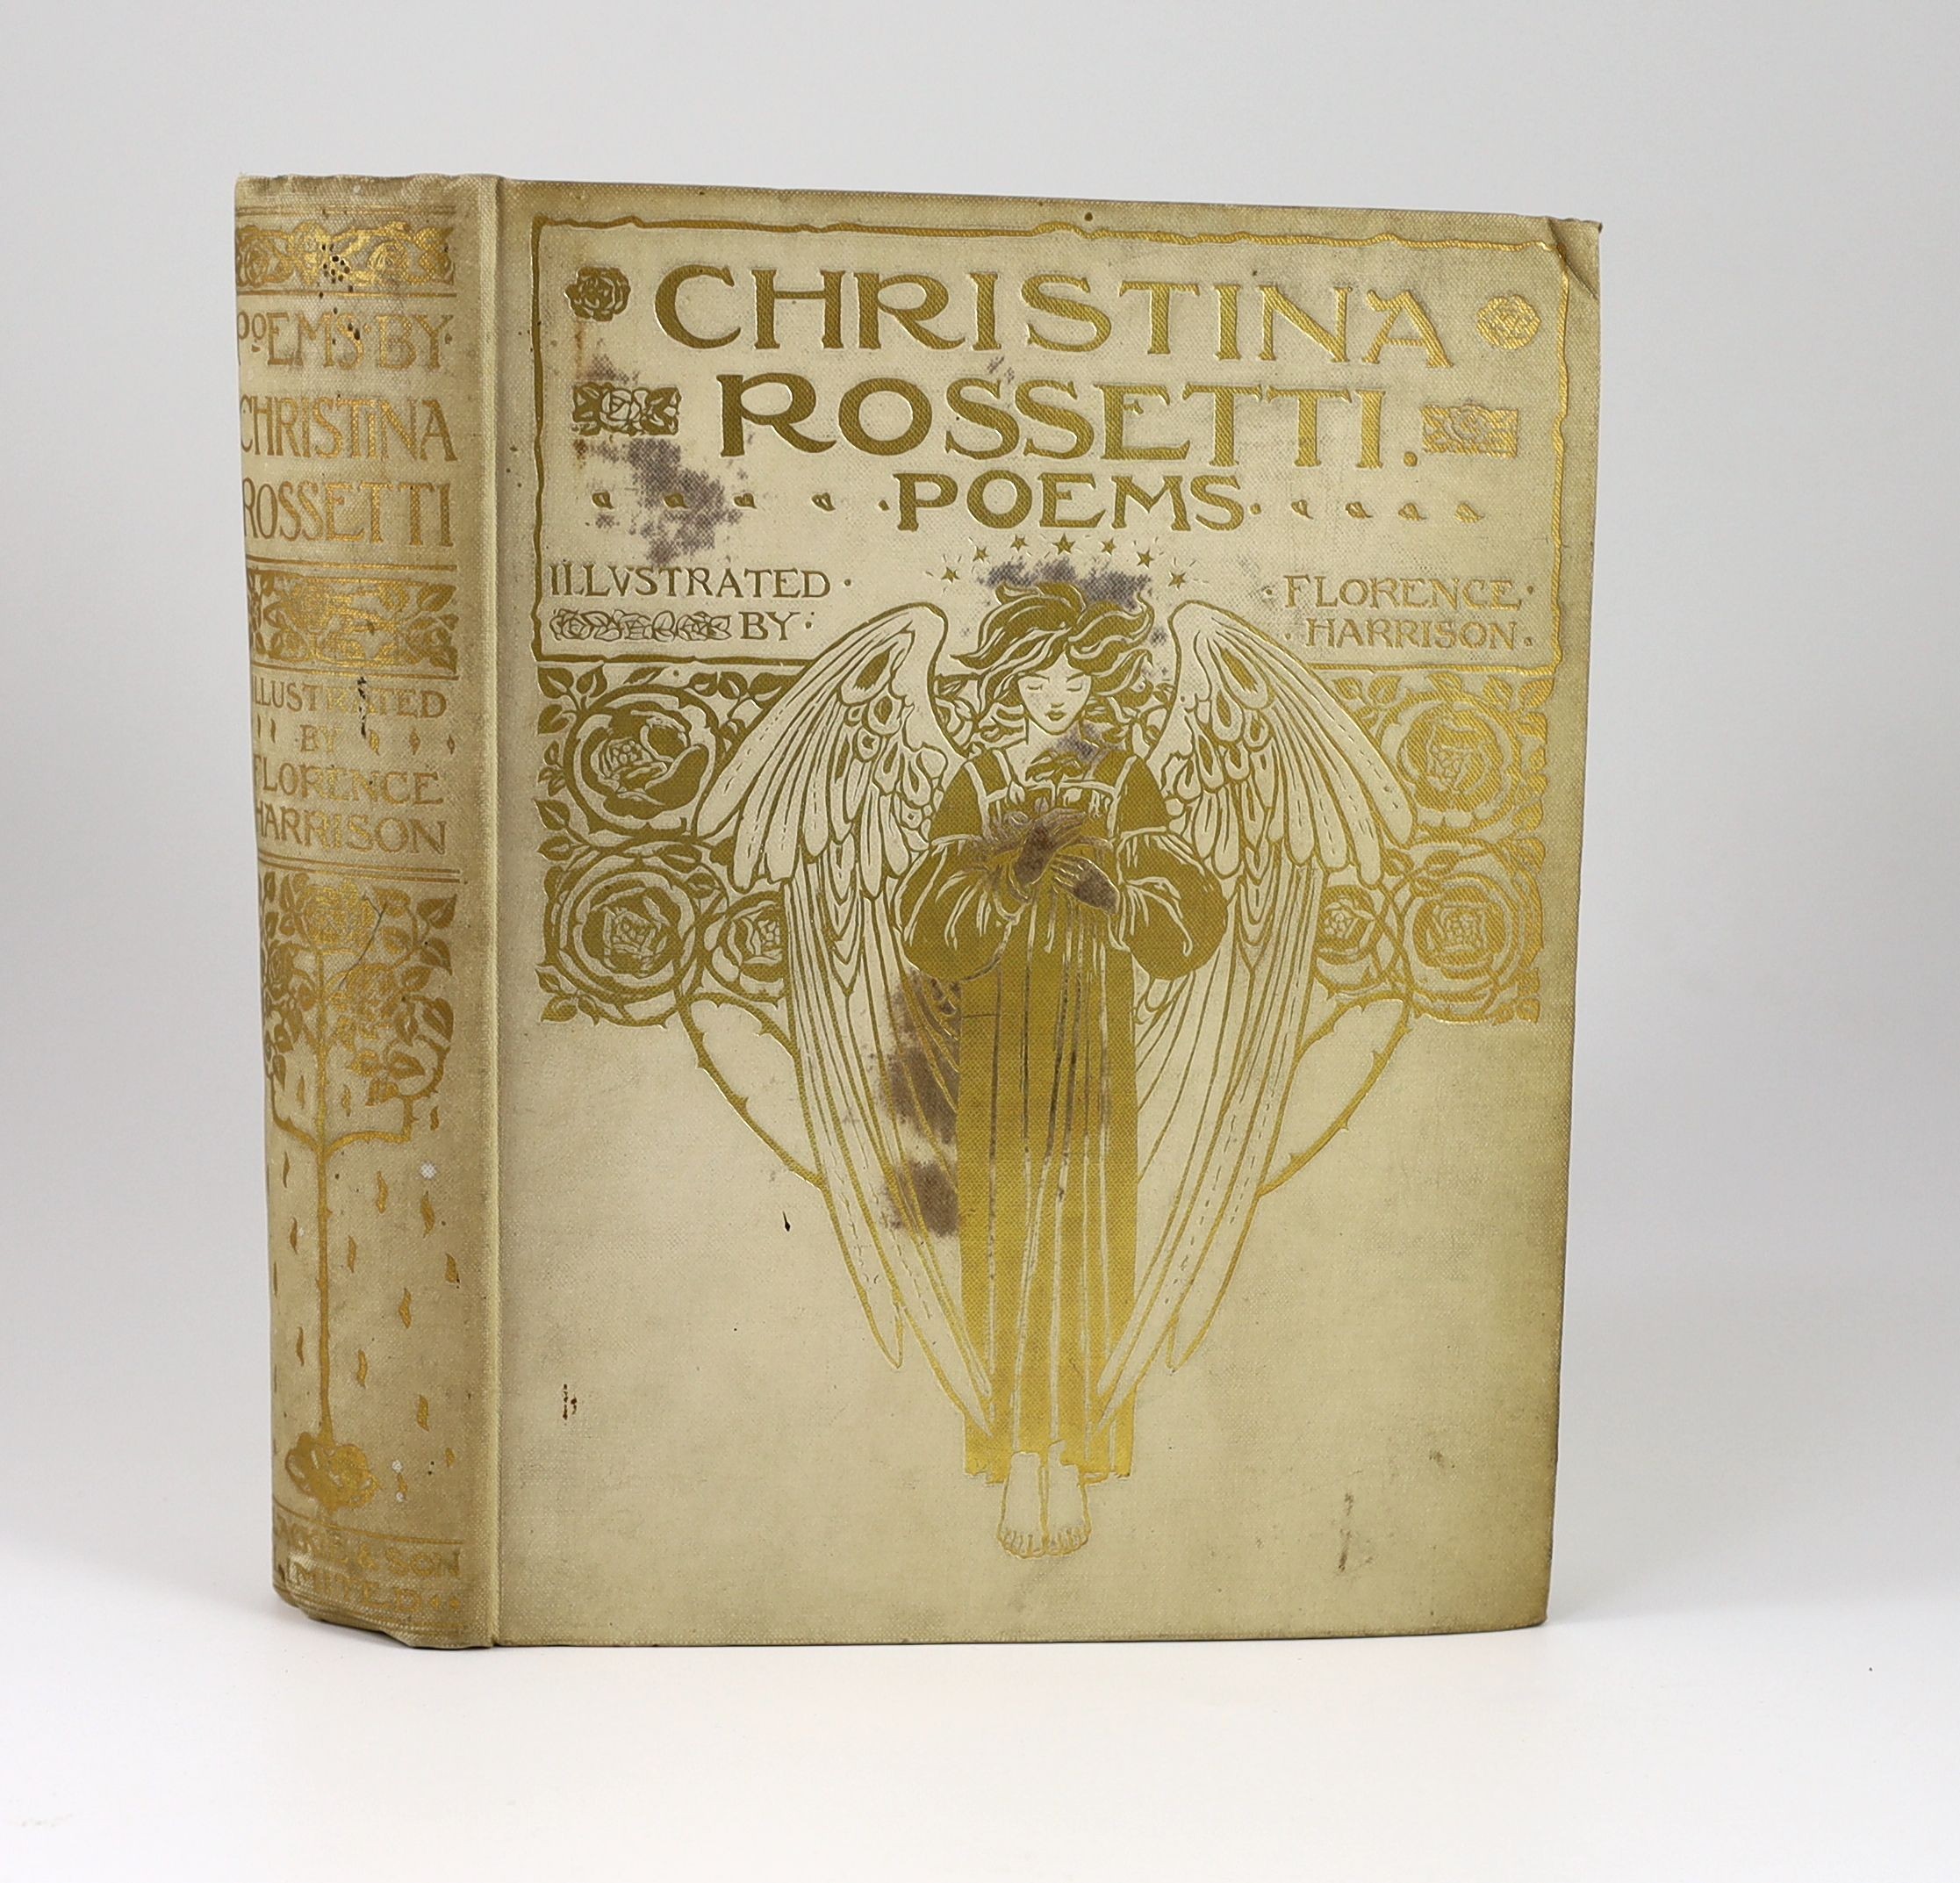 Rossetti, Christina Georgina - Poems, illustrated by Florence Harrison, 4to, cloth gilt, with 36 tipped-in colour plates, introduction by Alice Meynell, London, 1910